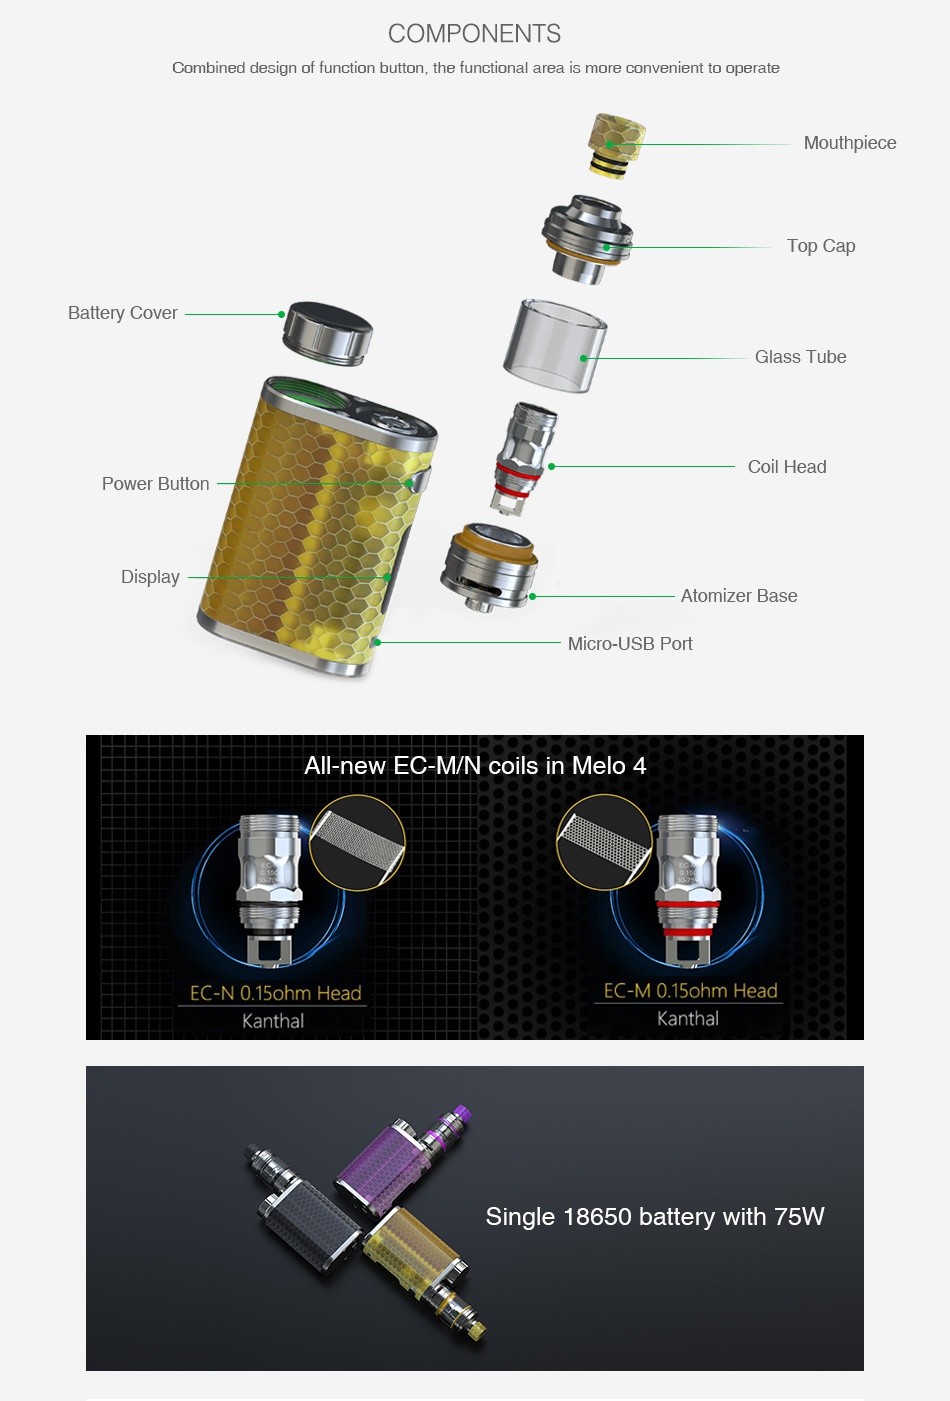 Eleaf iStick Pico Resin 75W TC Kit Limited Edition COMPONENTS Combined design of function button  the functional area is more convenient to operate TOp C Battery Cove Glass tube Coil Head Power Button play Atomizer Micro USB Port All new EC mn coils in melo 4 EC NO 15ohm Head EC M 0 15ohm Head Kantha Kanthal Single 18650 battery with 75W